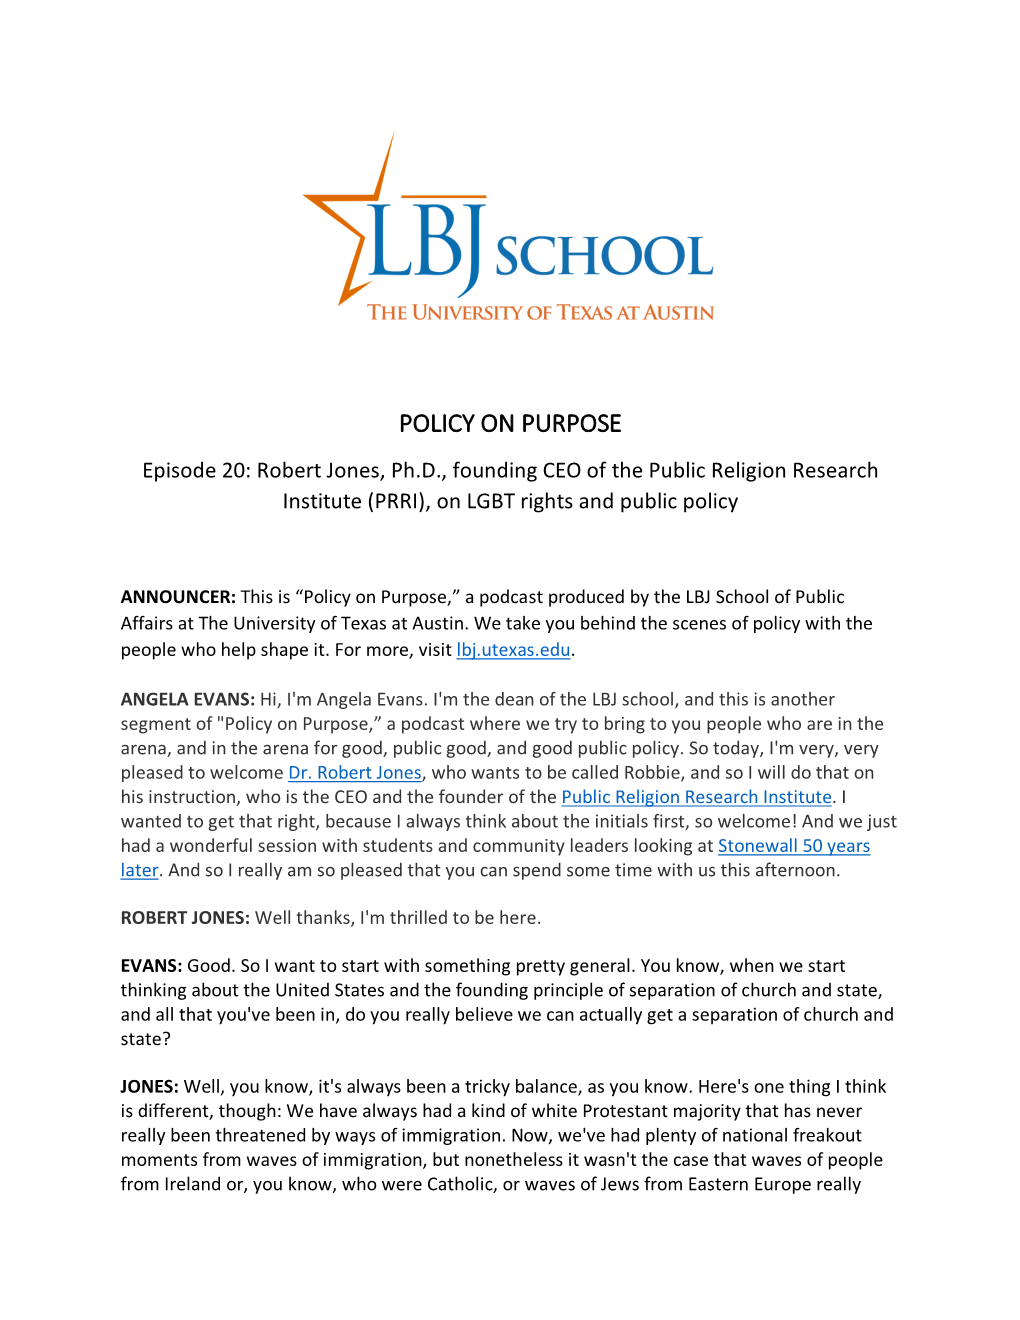 POLICY on PURPOSE Episode 20: Robert Jones, Ph.D., Founding CEO of the Public Religion Research Institute (PRRI), on LGBT Rights and Public Policy